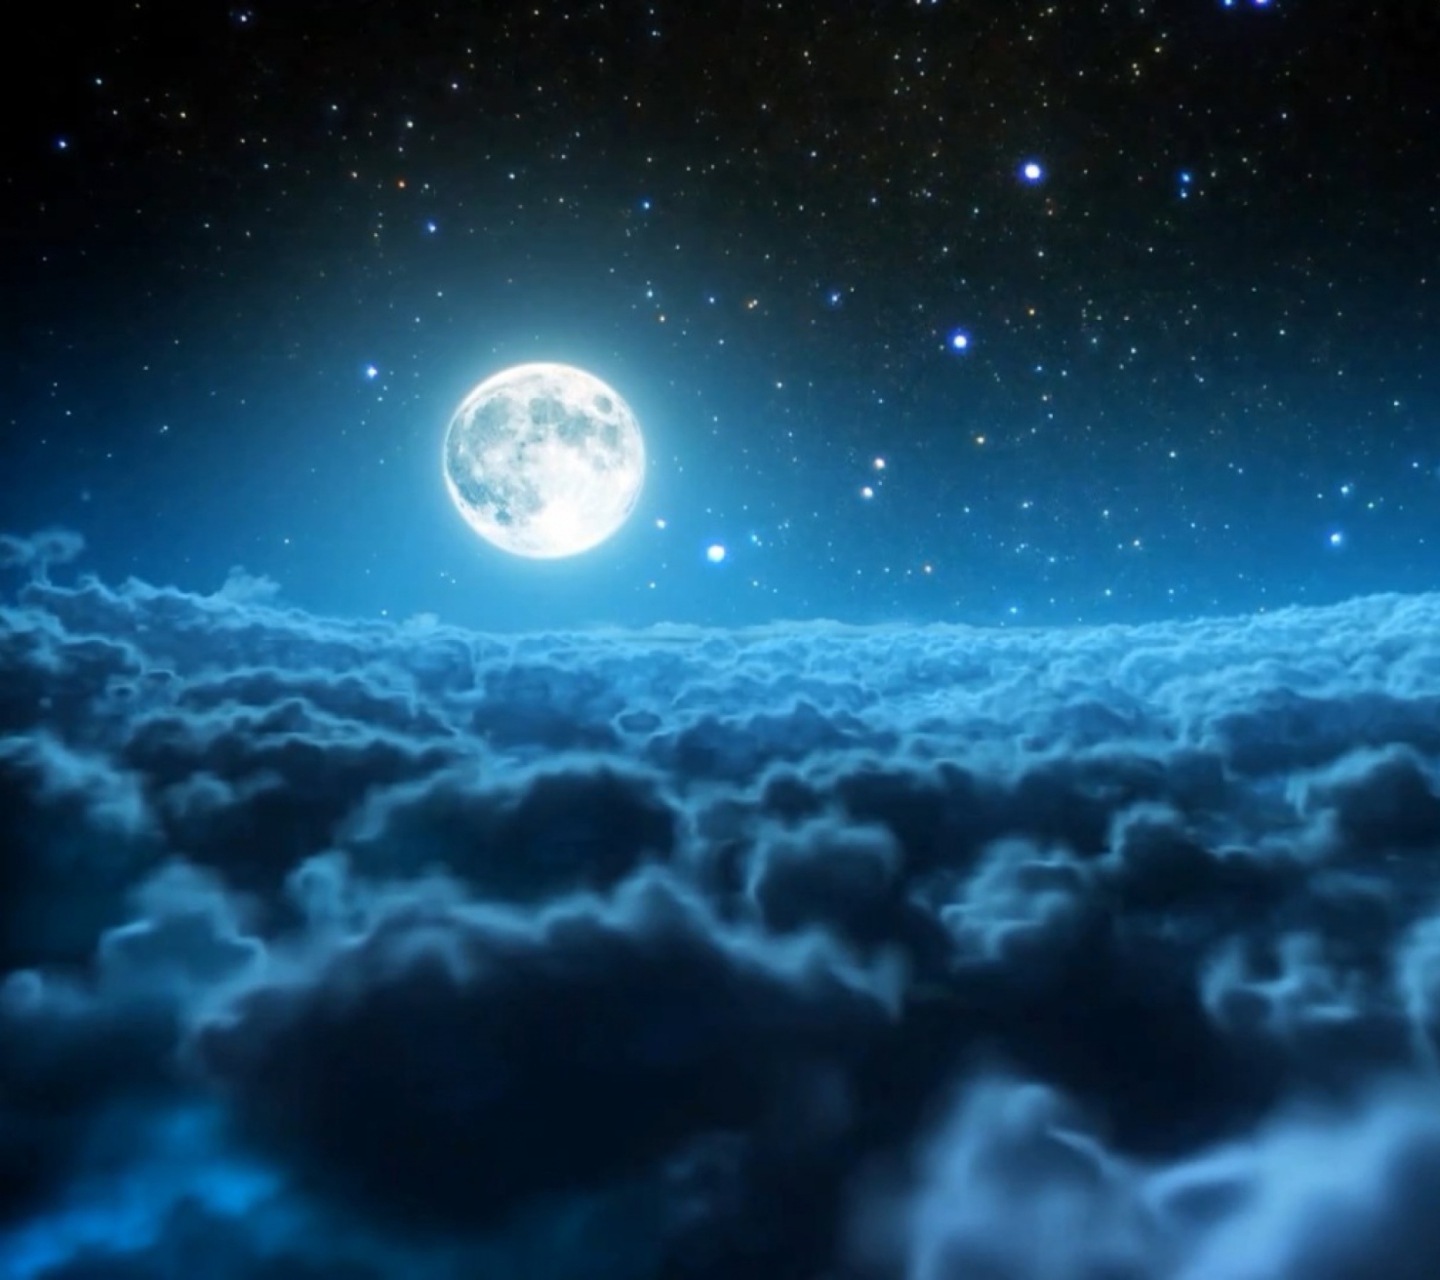 Cloudy Night And Sparkling Moon wallpaper 1440x1280